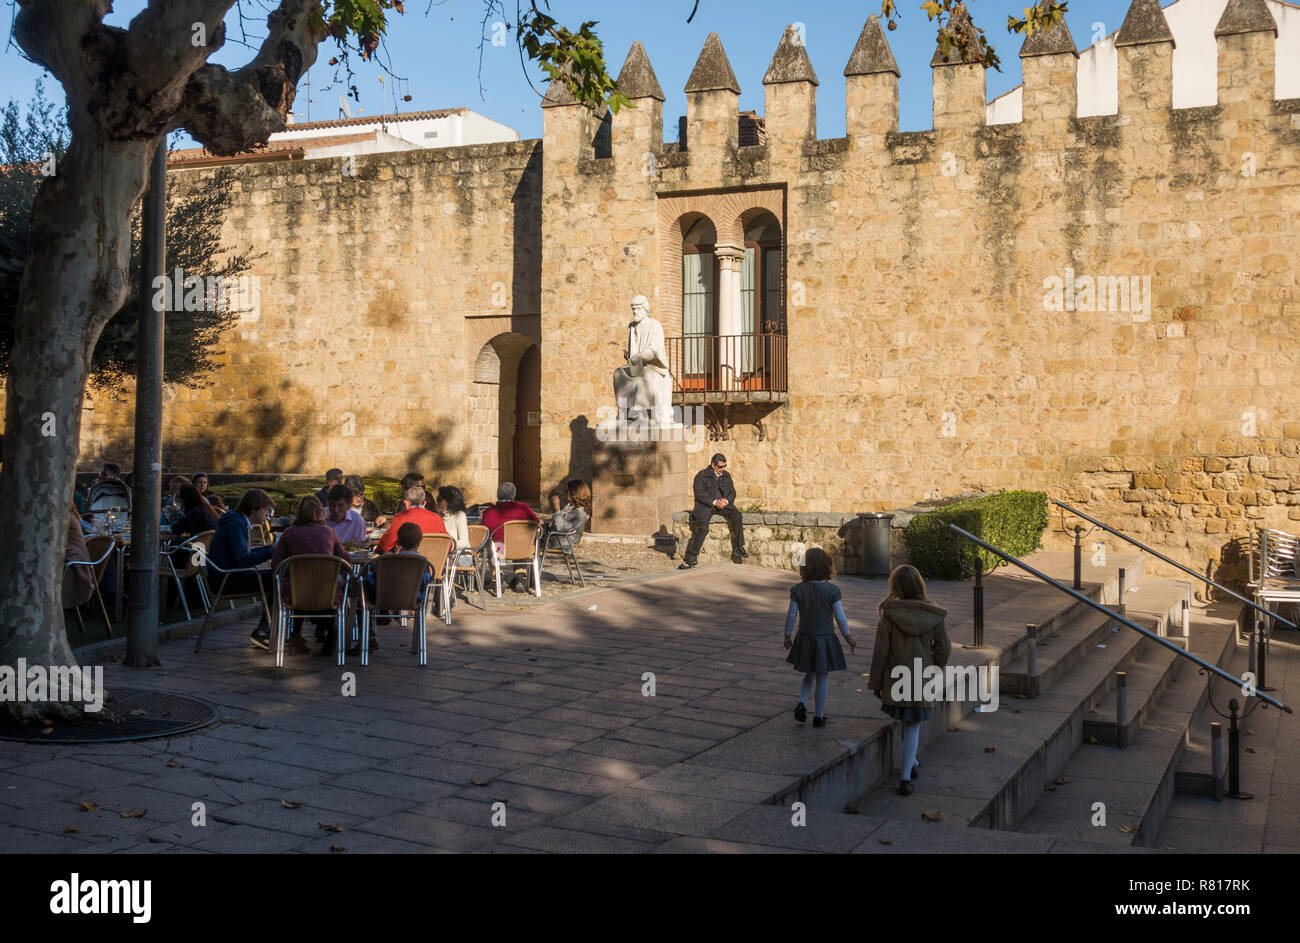 Cordoba, ancient medieval city walls running along the calle Cairuán with terrace restaurant, statue of arab philosopher Averroes, Cordoba, Andal Stock Photo